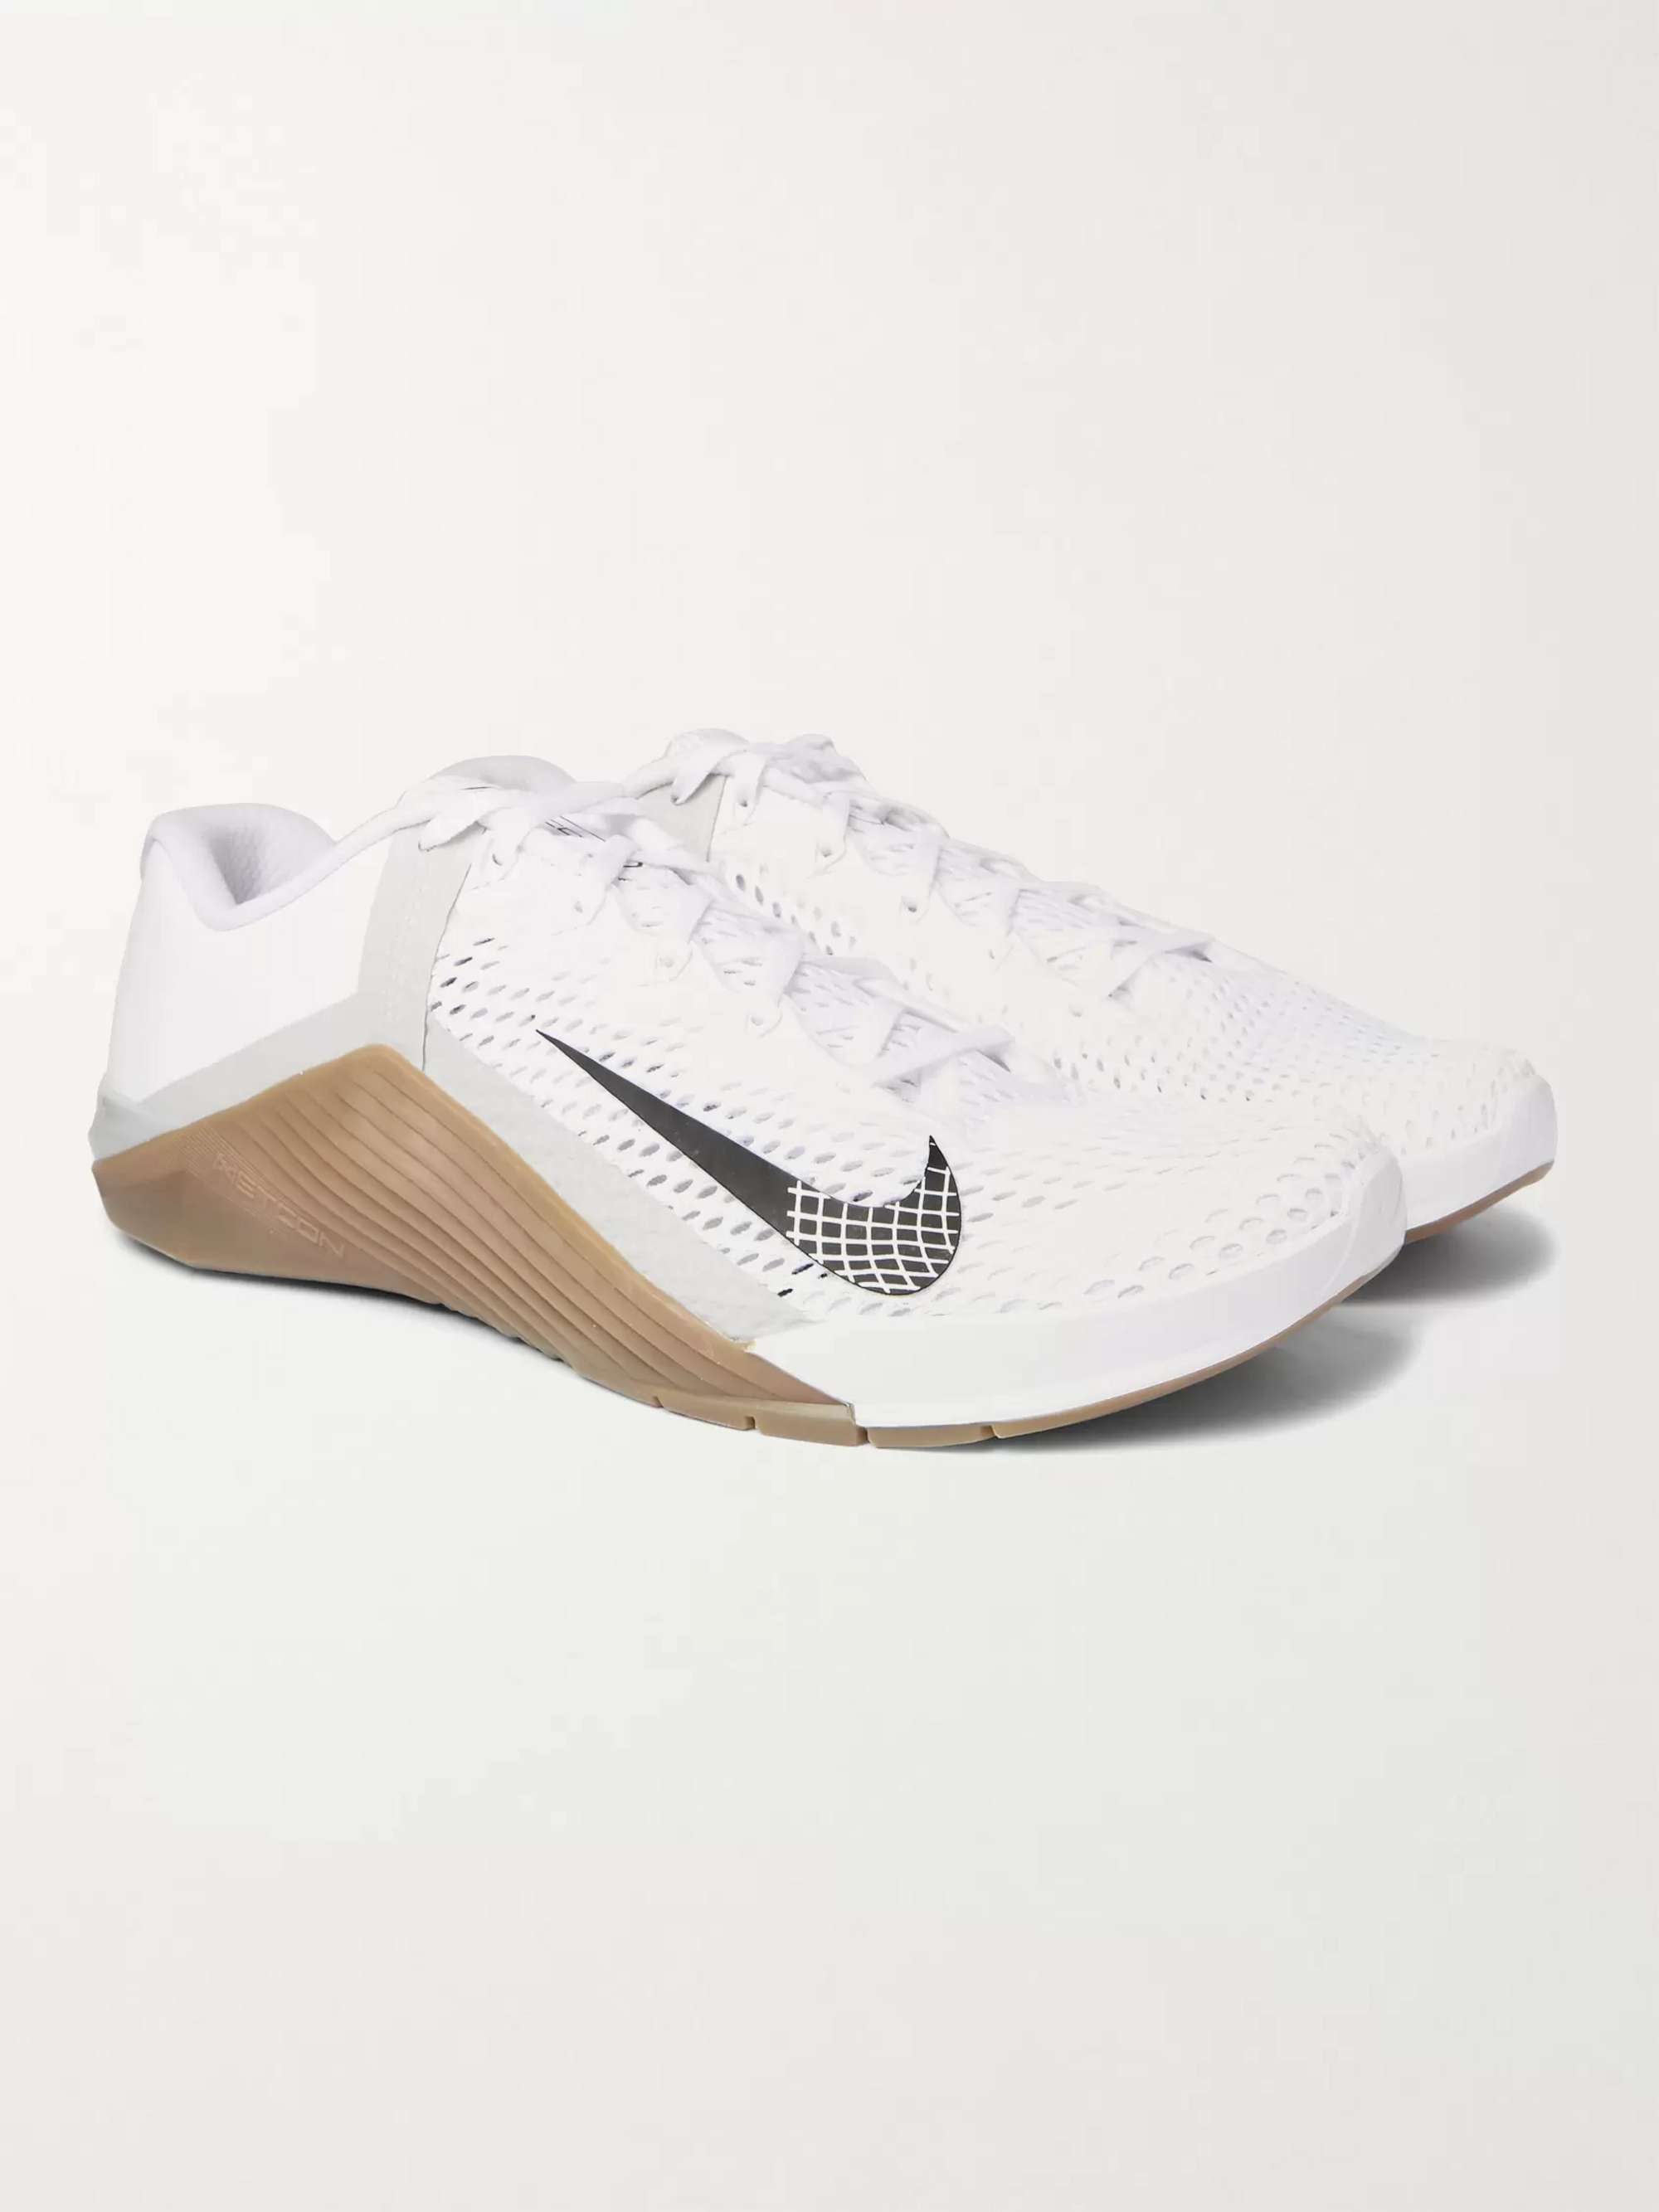 NIKE TRAINING Metcon 6 Rubber-Trimmed Mesh Sneakers